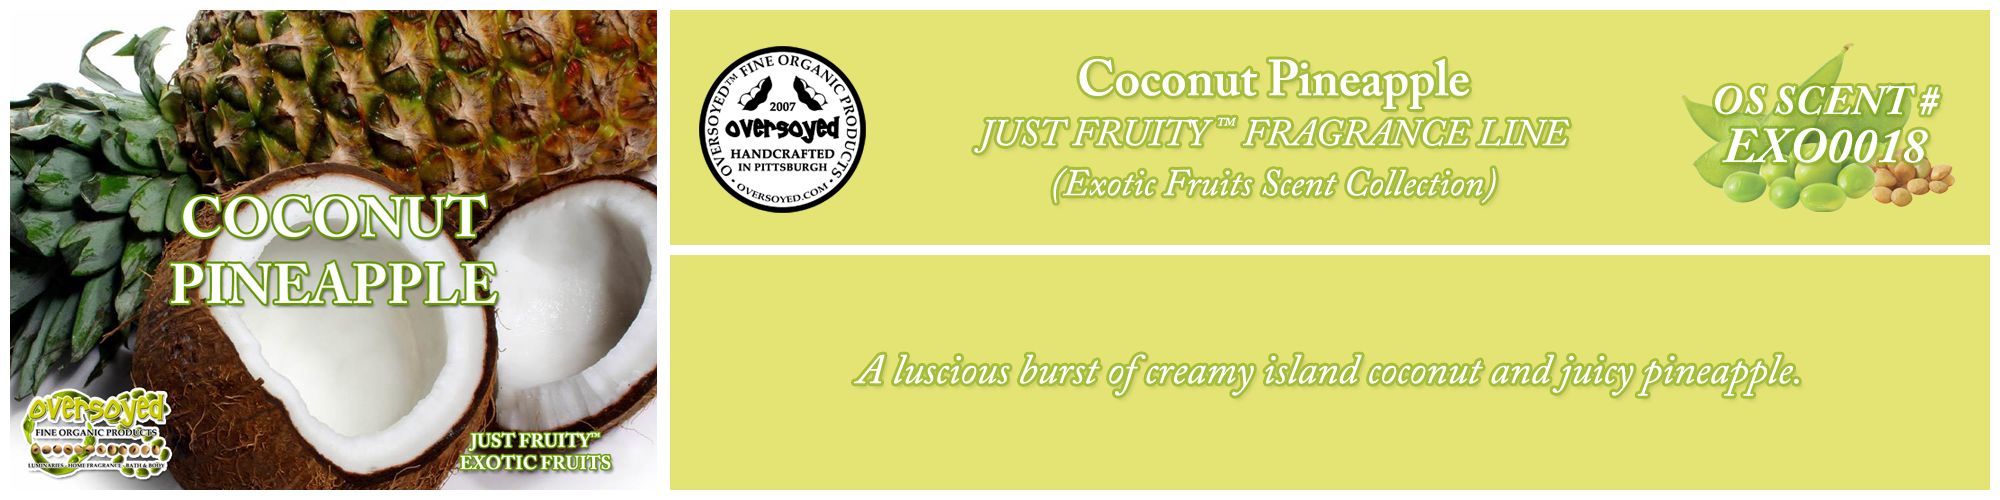 Coconut Pineapple Handcrafted Products Collection